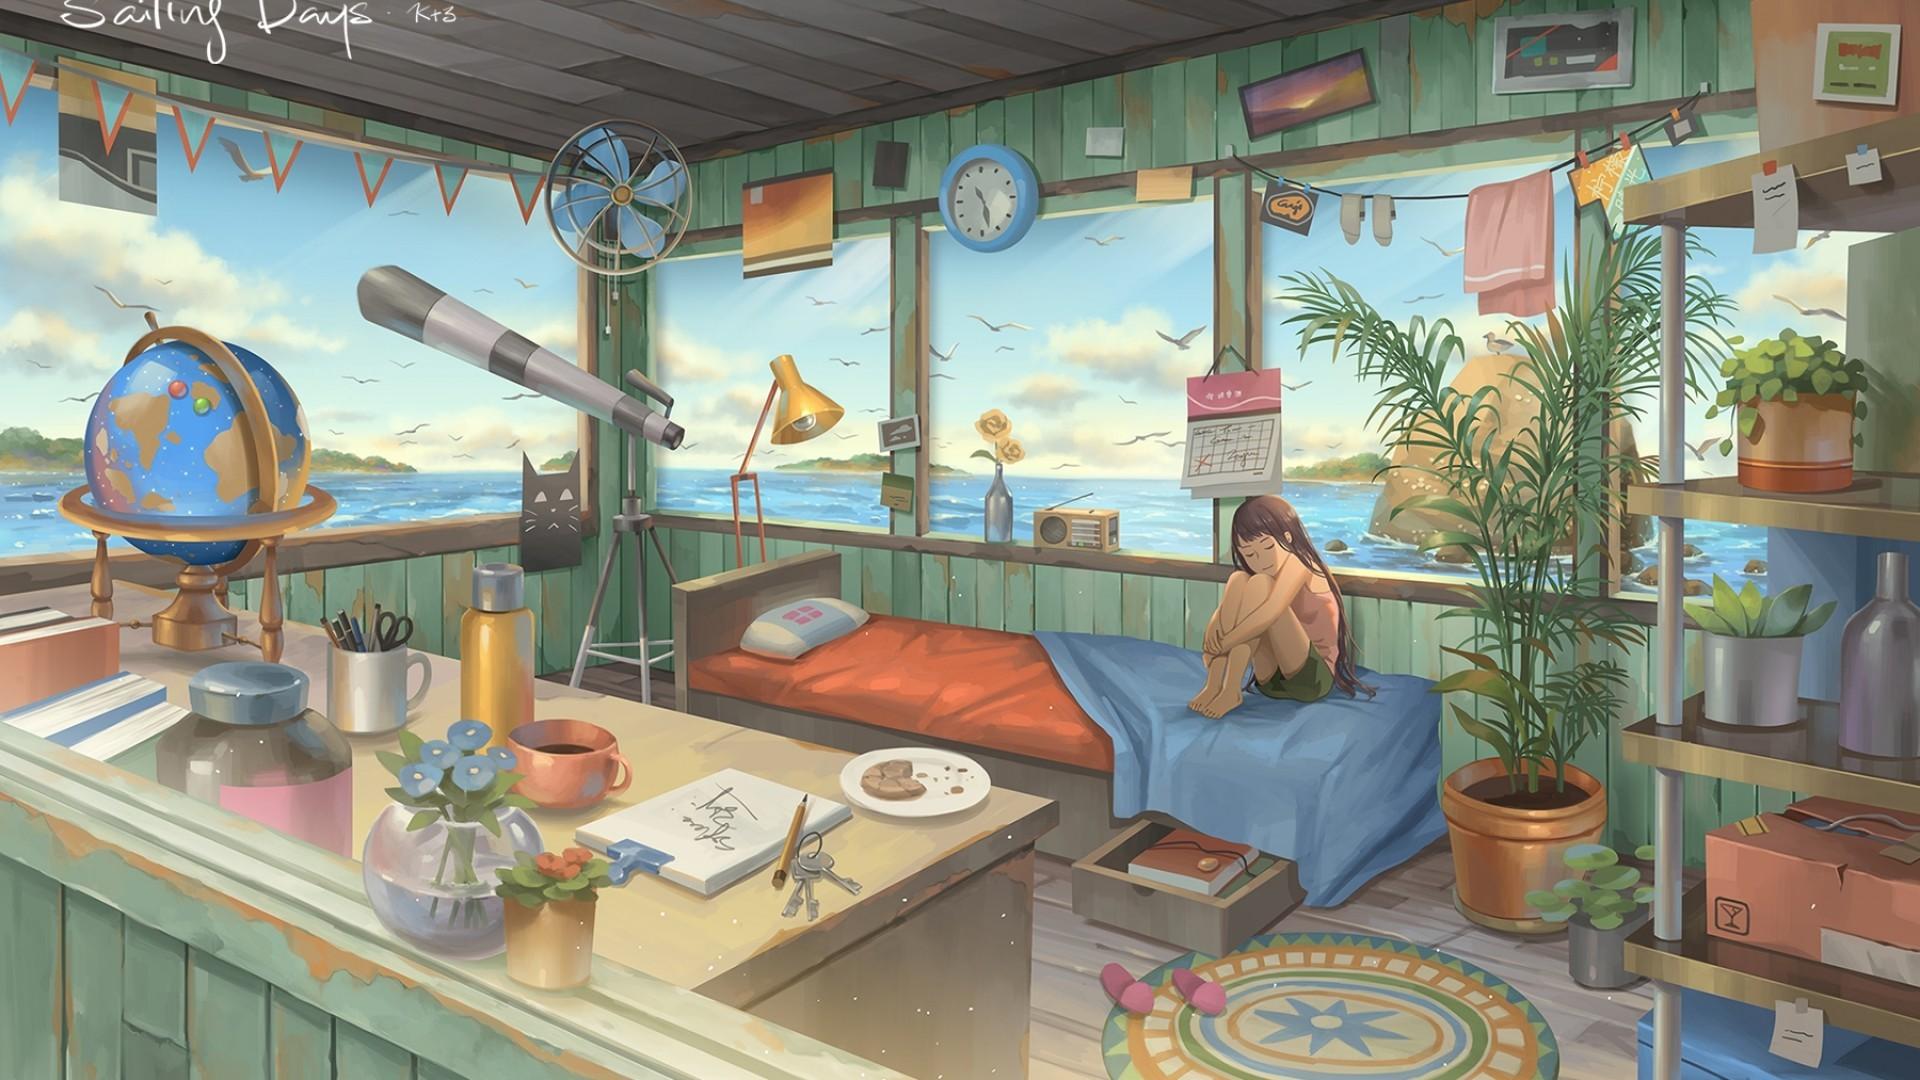 Download 1920x1080 Room, Ocean, Relax, Anime Girl, Sailing Days